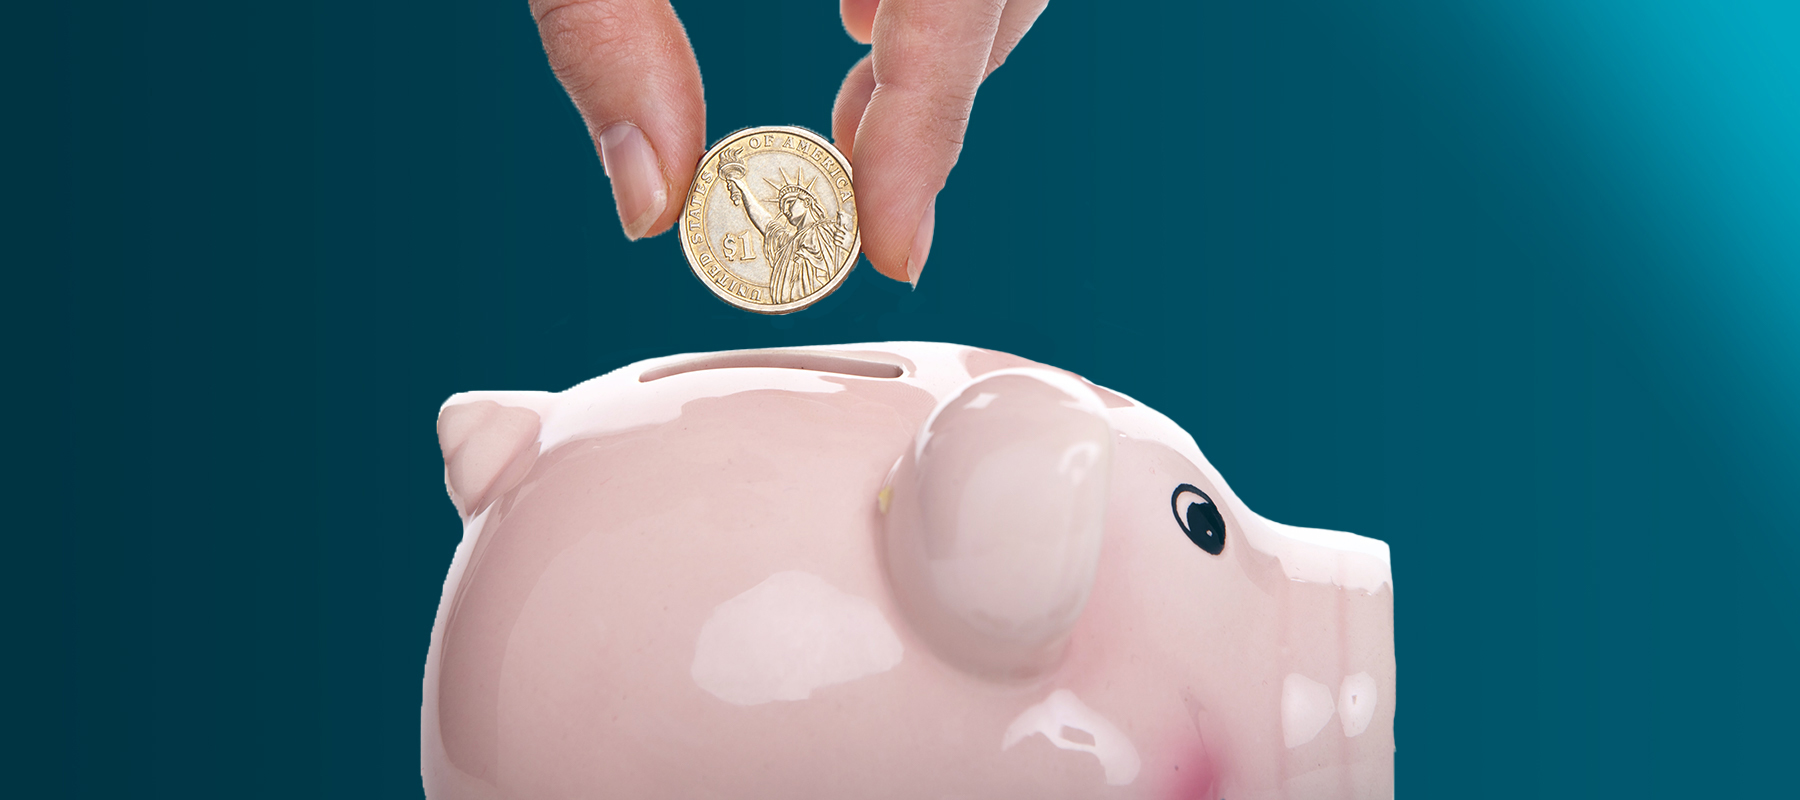 heroic fundraising featured image pig money